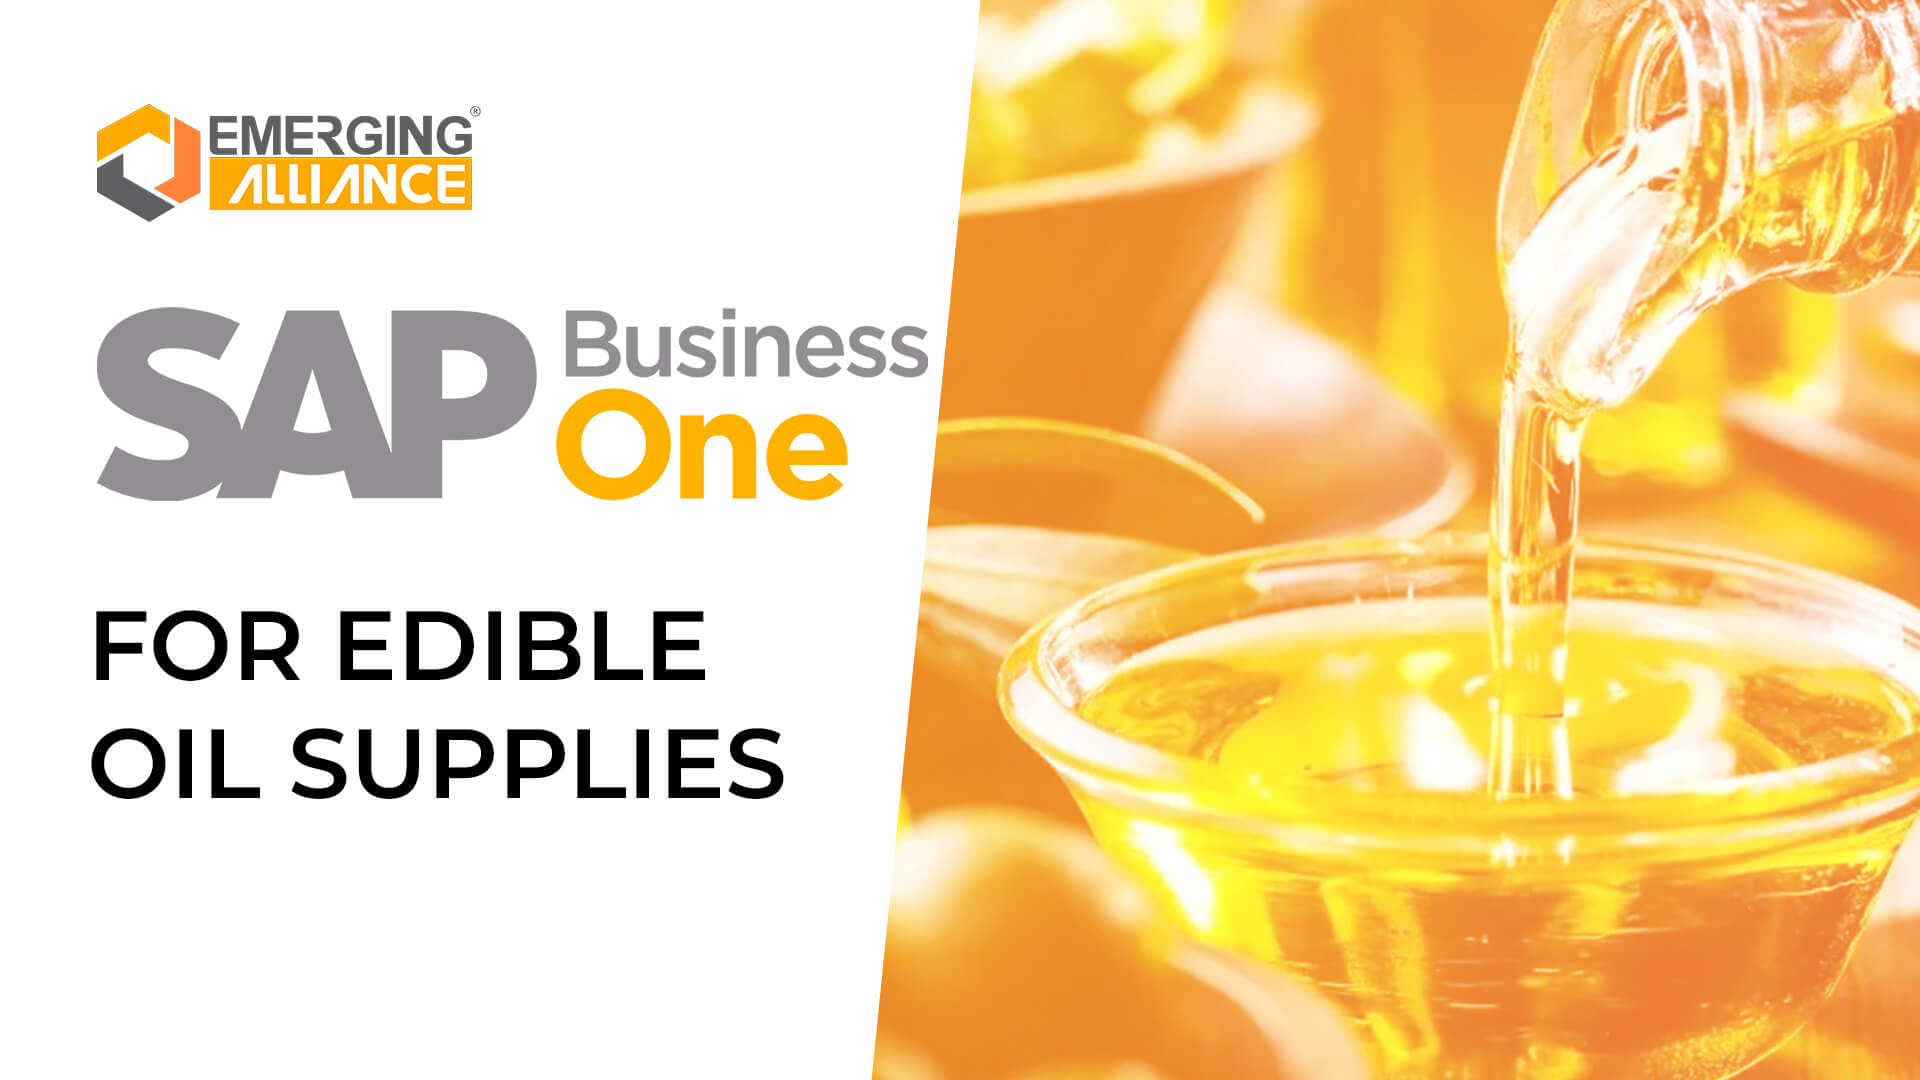 sap business one for edible oil supplies